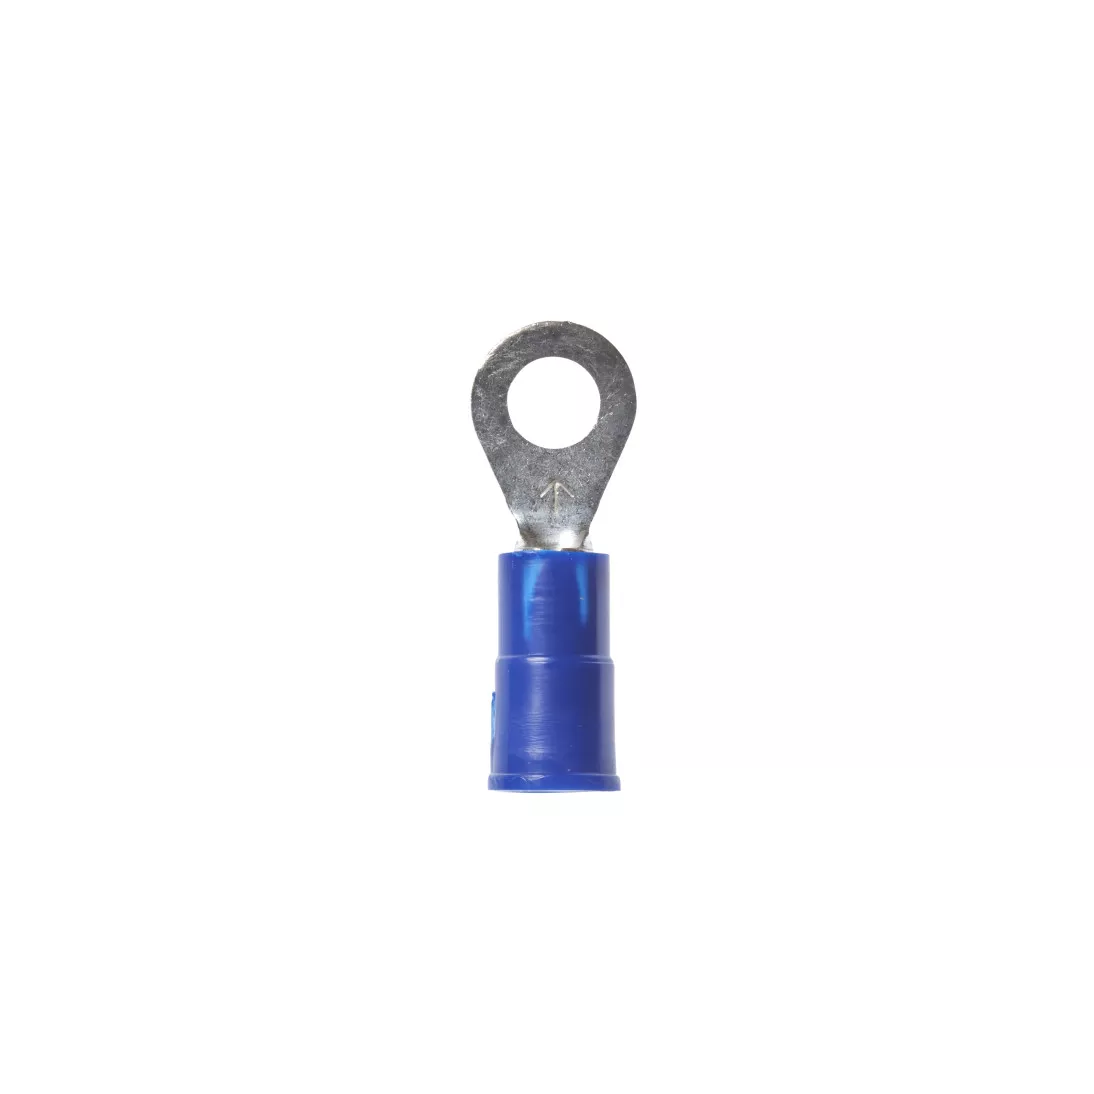 3M™ Scotchlok™ Ring Vinyl Insulated, 100/bottle, MVU14-8RX,
standard-style ring tongue fits around the stud, 500/Case